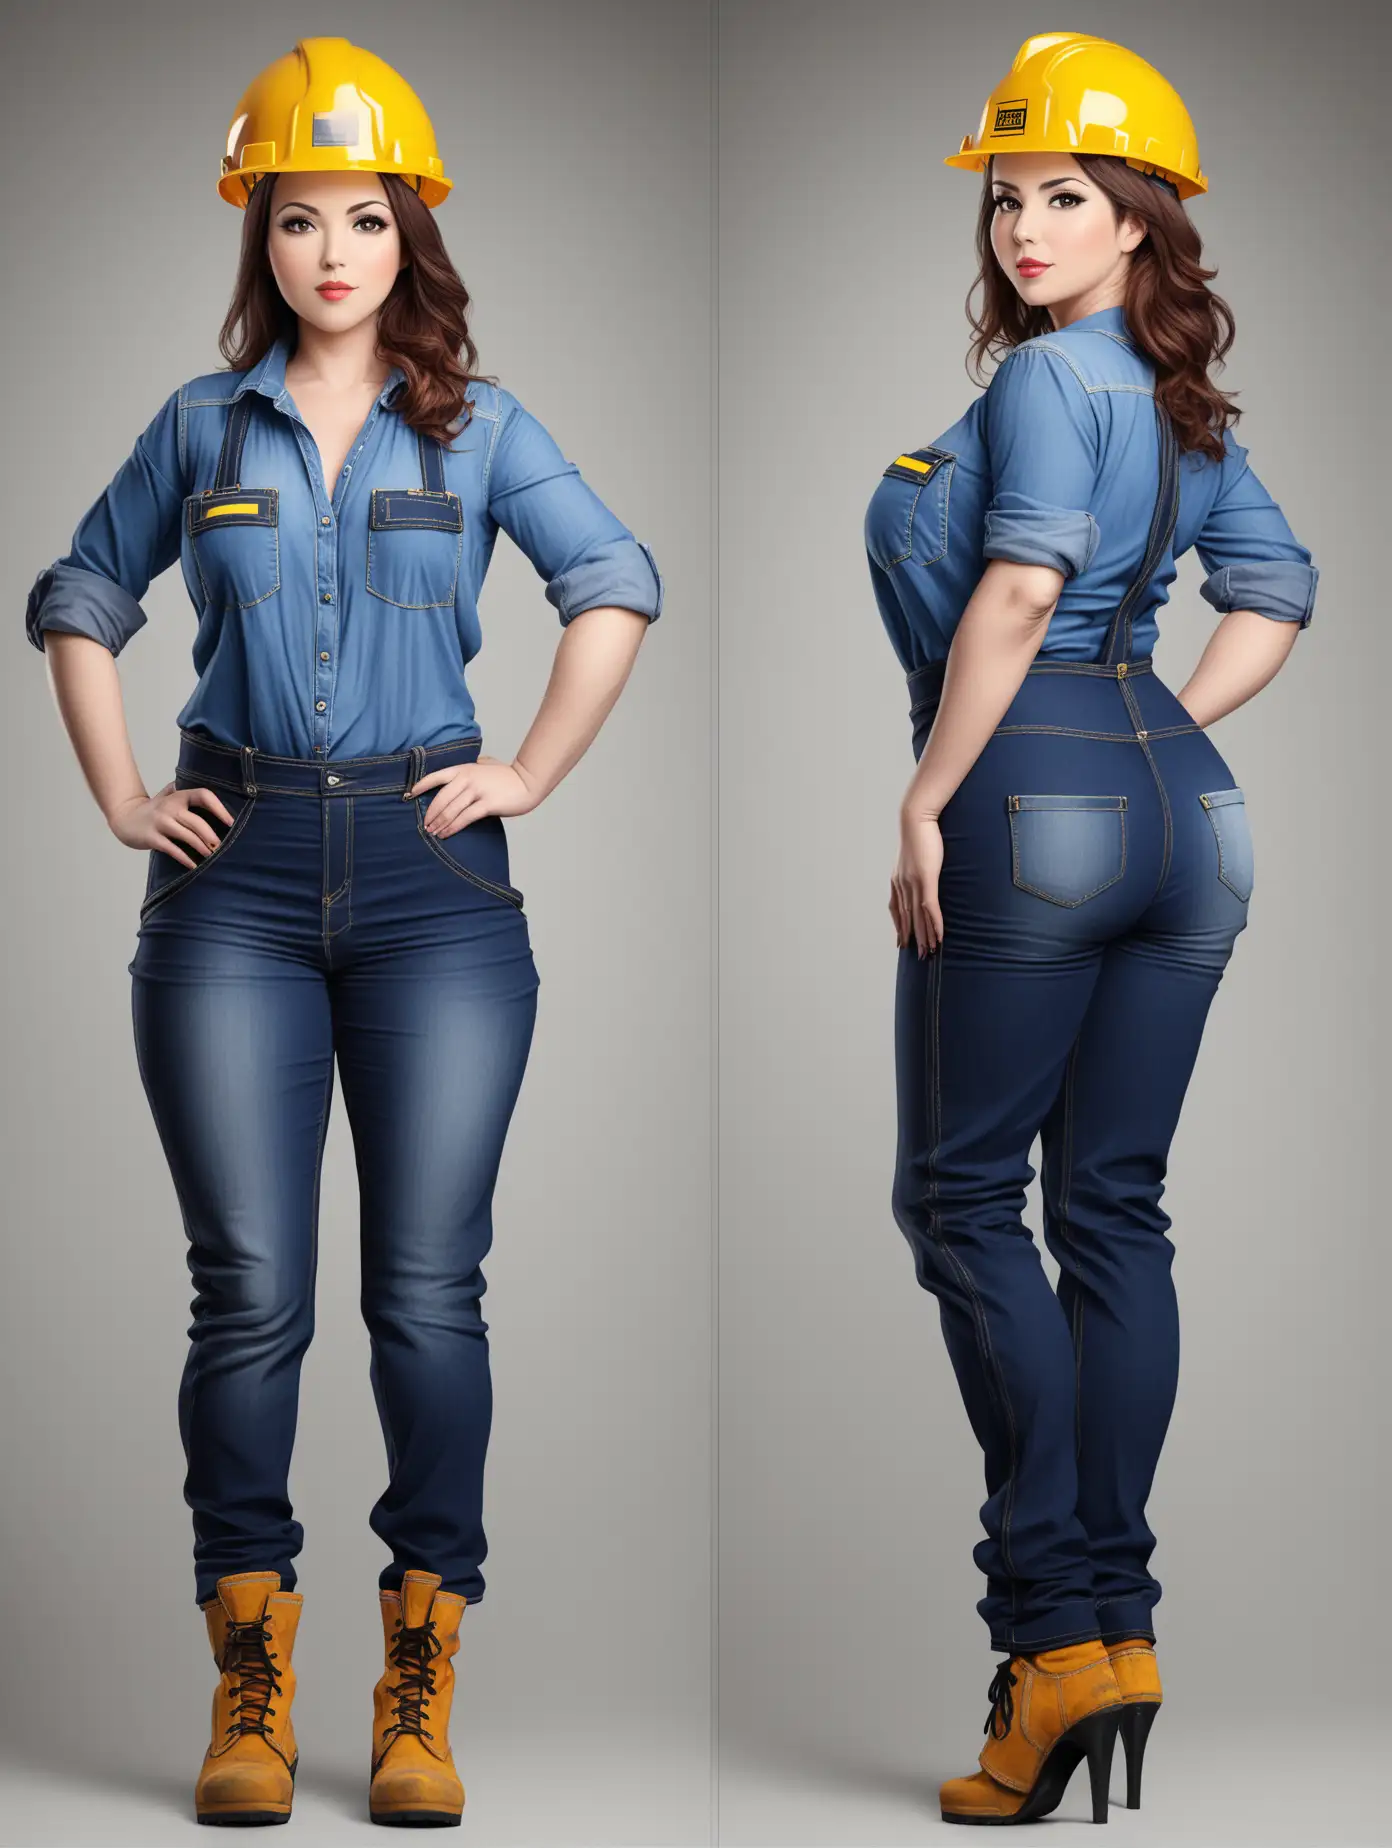 Attractive-30YearOld-Woman-in-Construction-Worker-Outfit-with-Two-Alluring-Poses-and-Emphasis-on-Her-Voluptuous-Figure